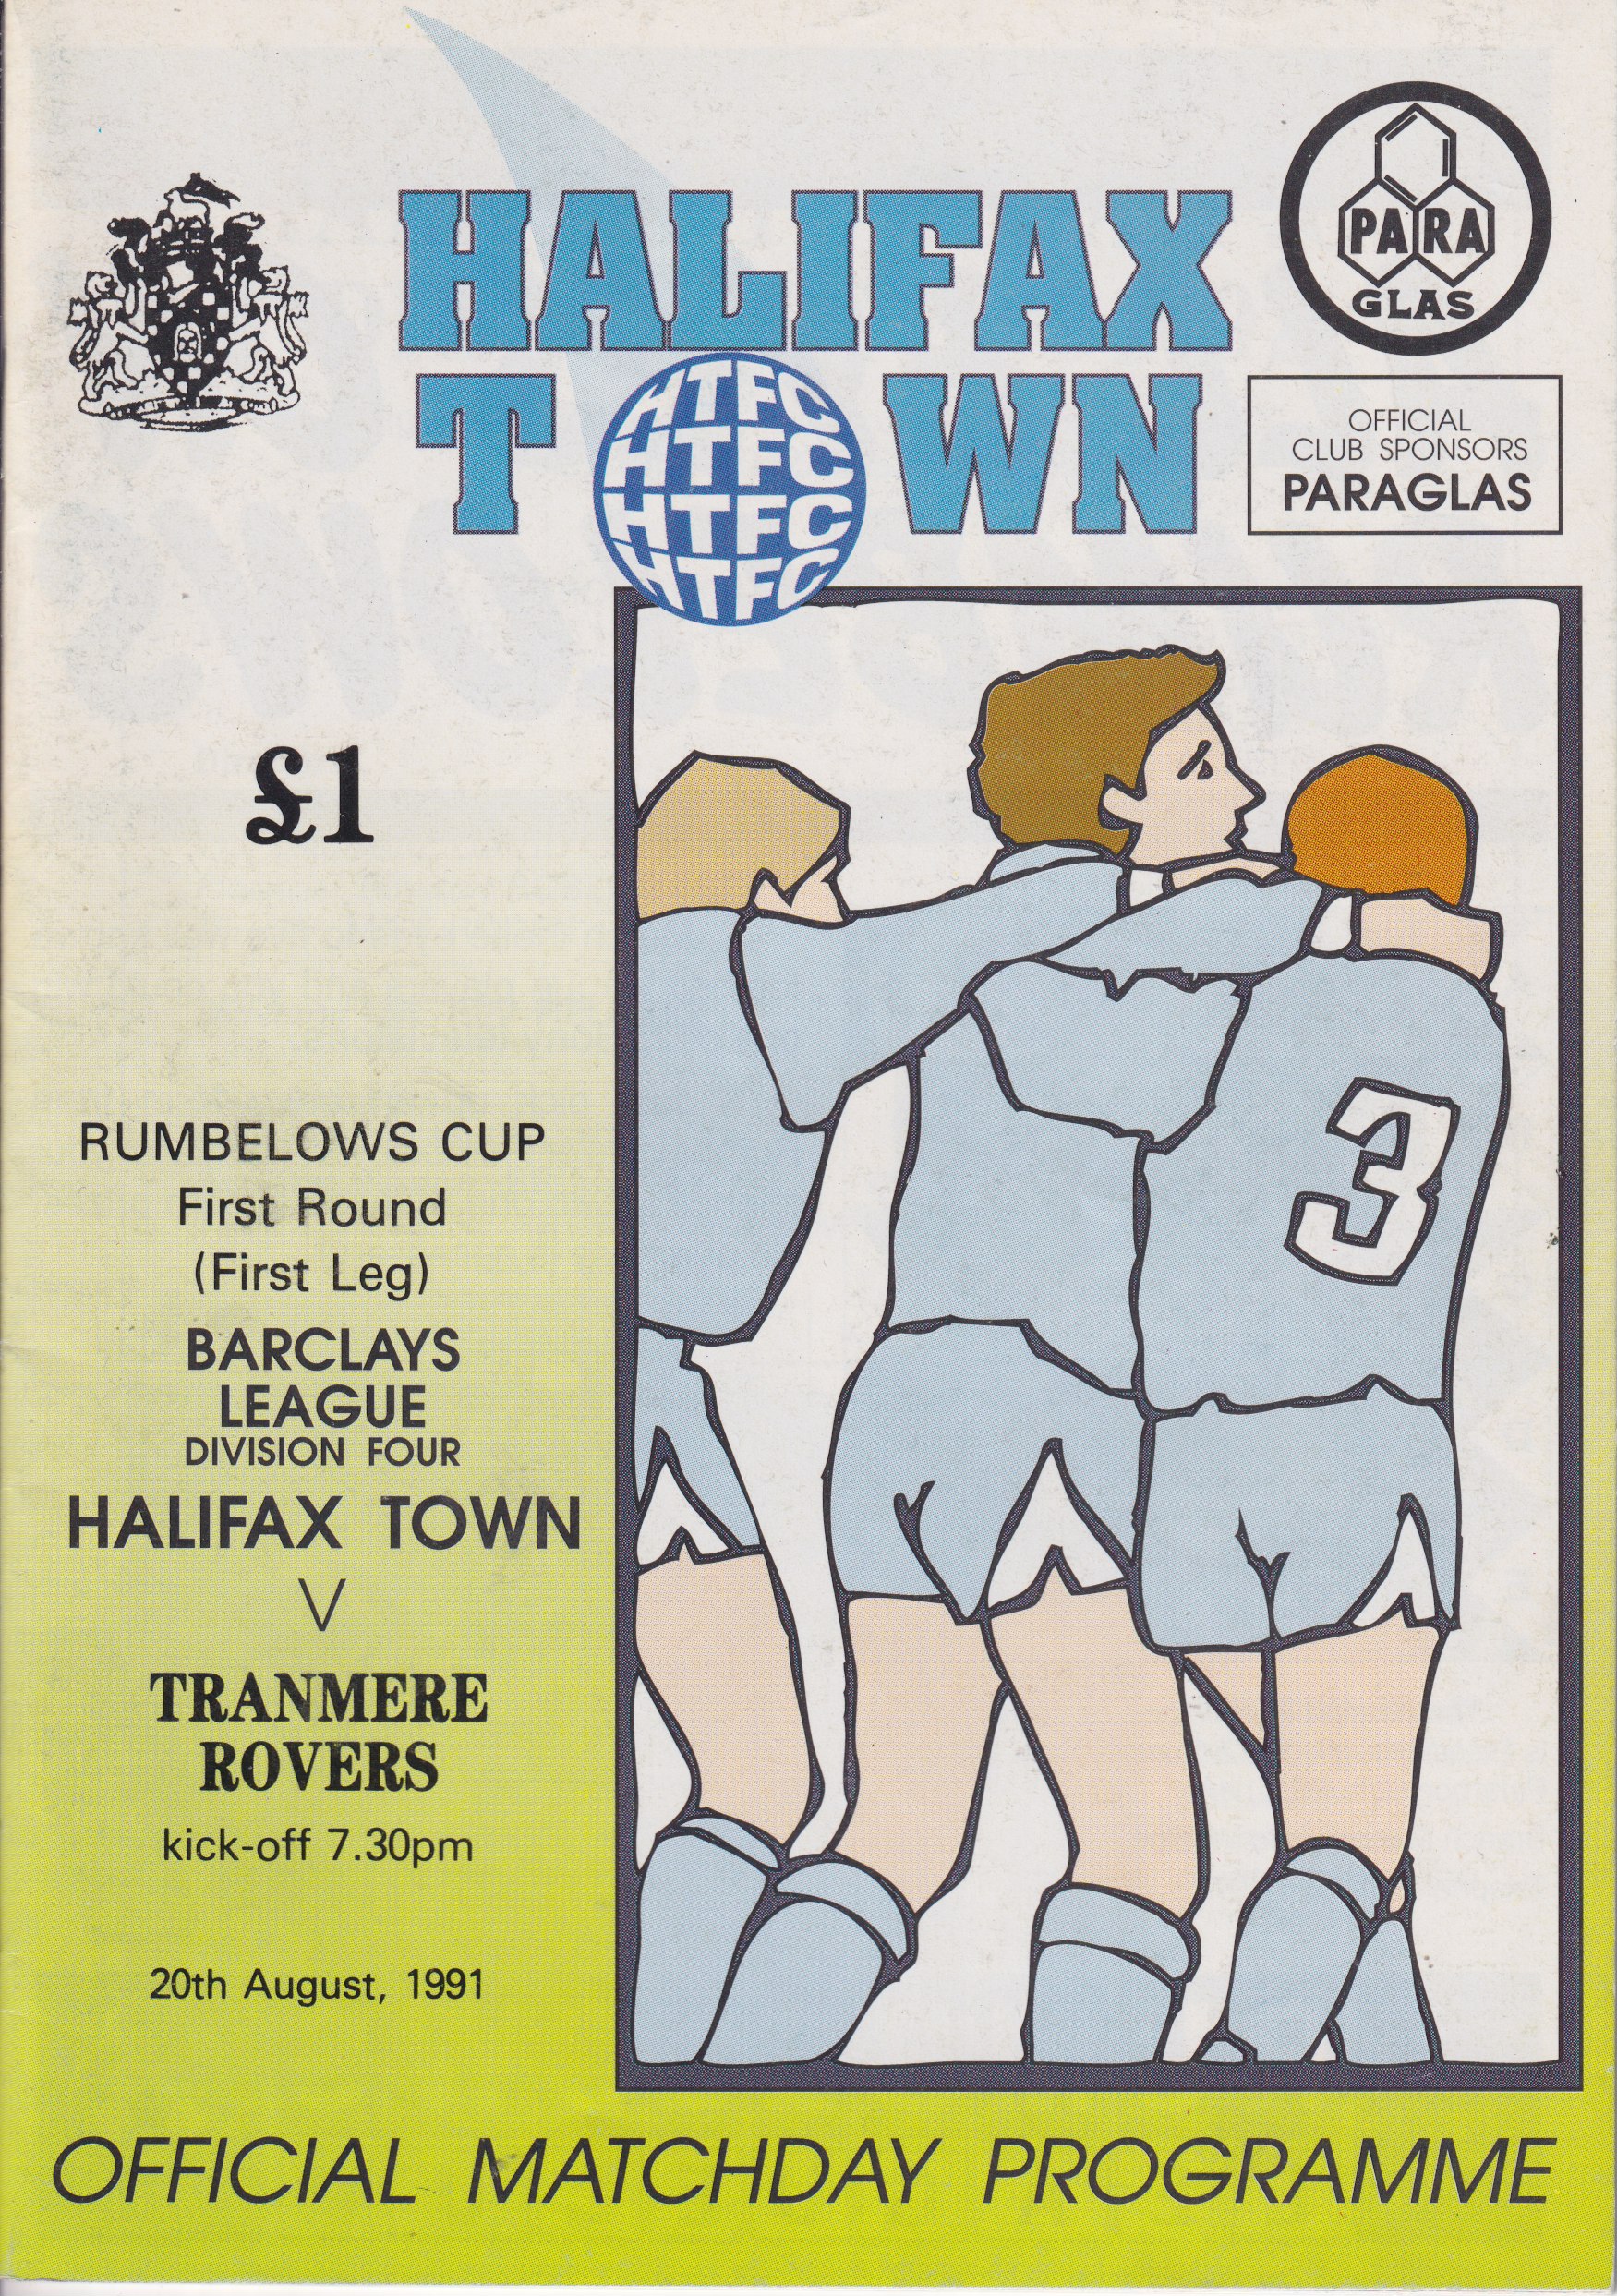 Match Programme For {home}} 3-4 Tranmere Rovers, League Cup, 1991-08-20